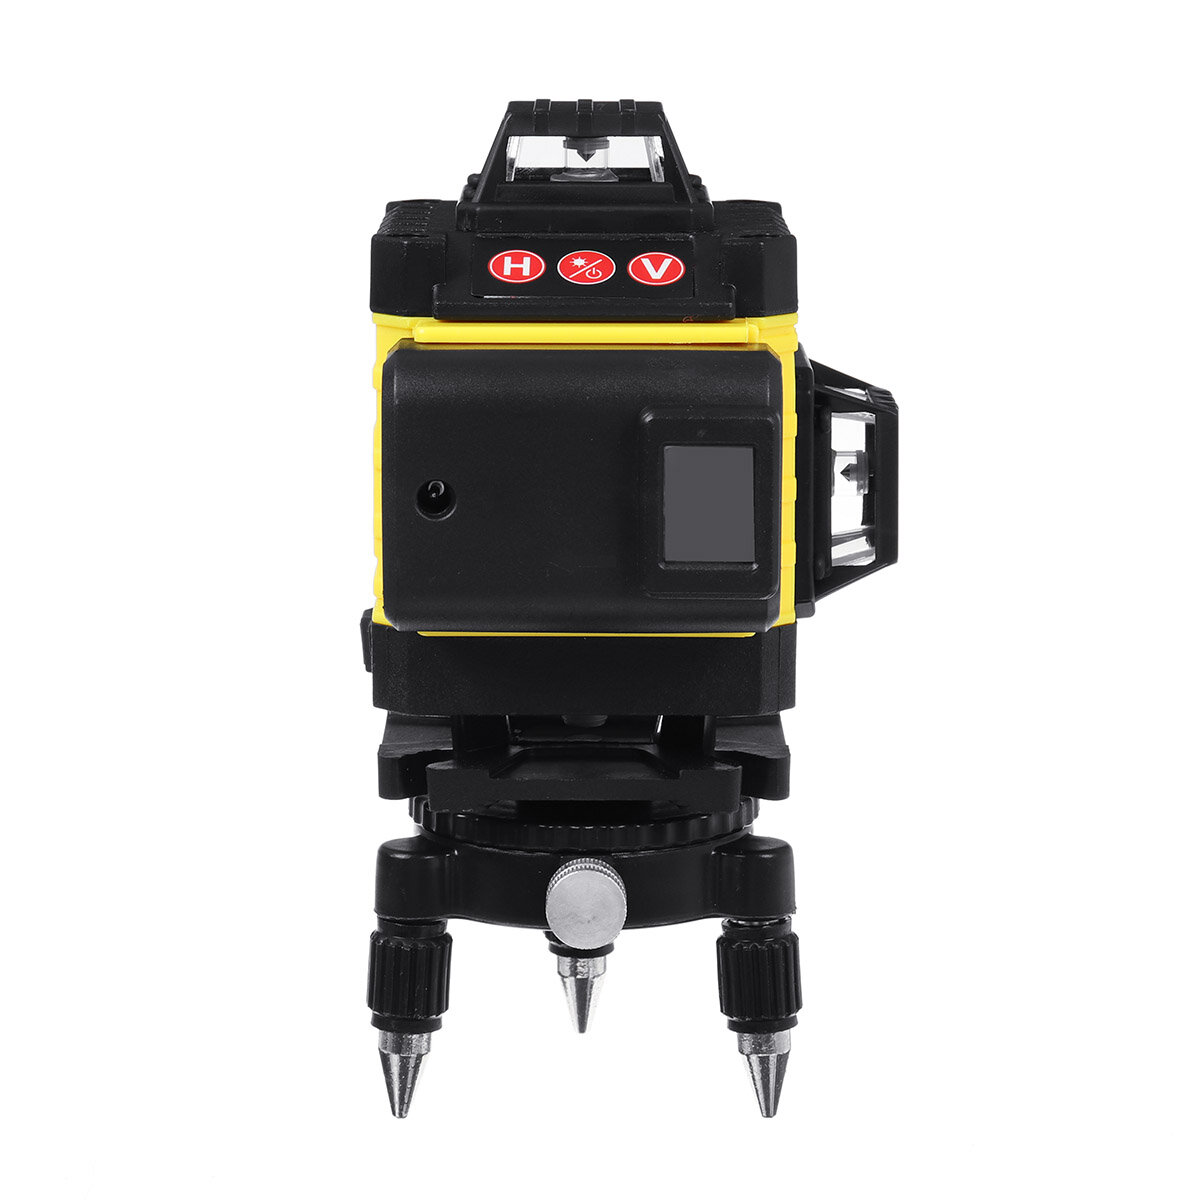 12/16 Line 4D Laser Level Green Light Digital Self Leveling 360? Rotary Measure with 6000mah Battery